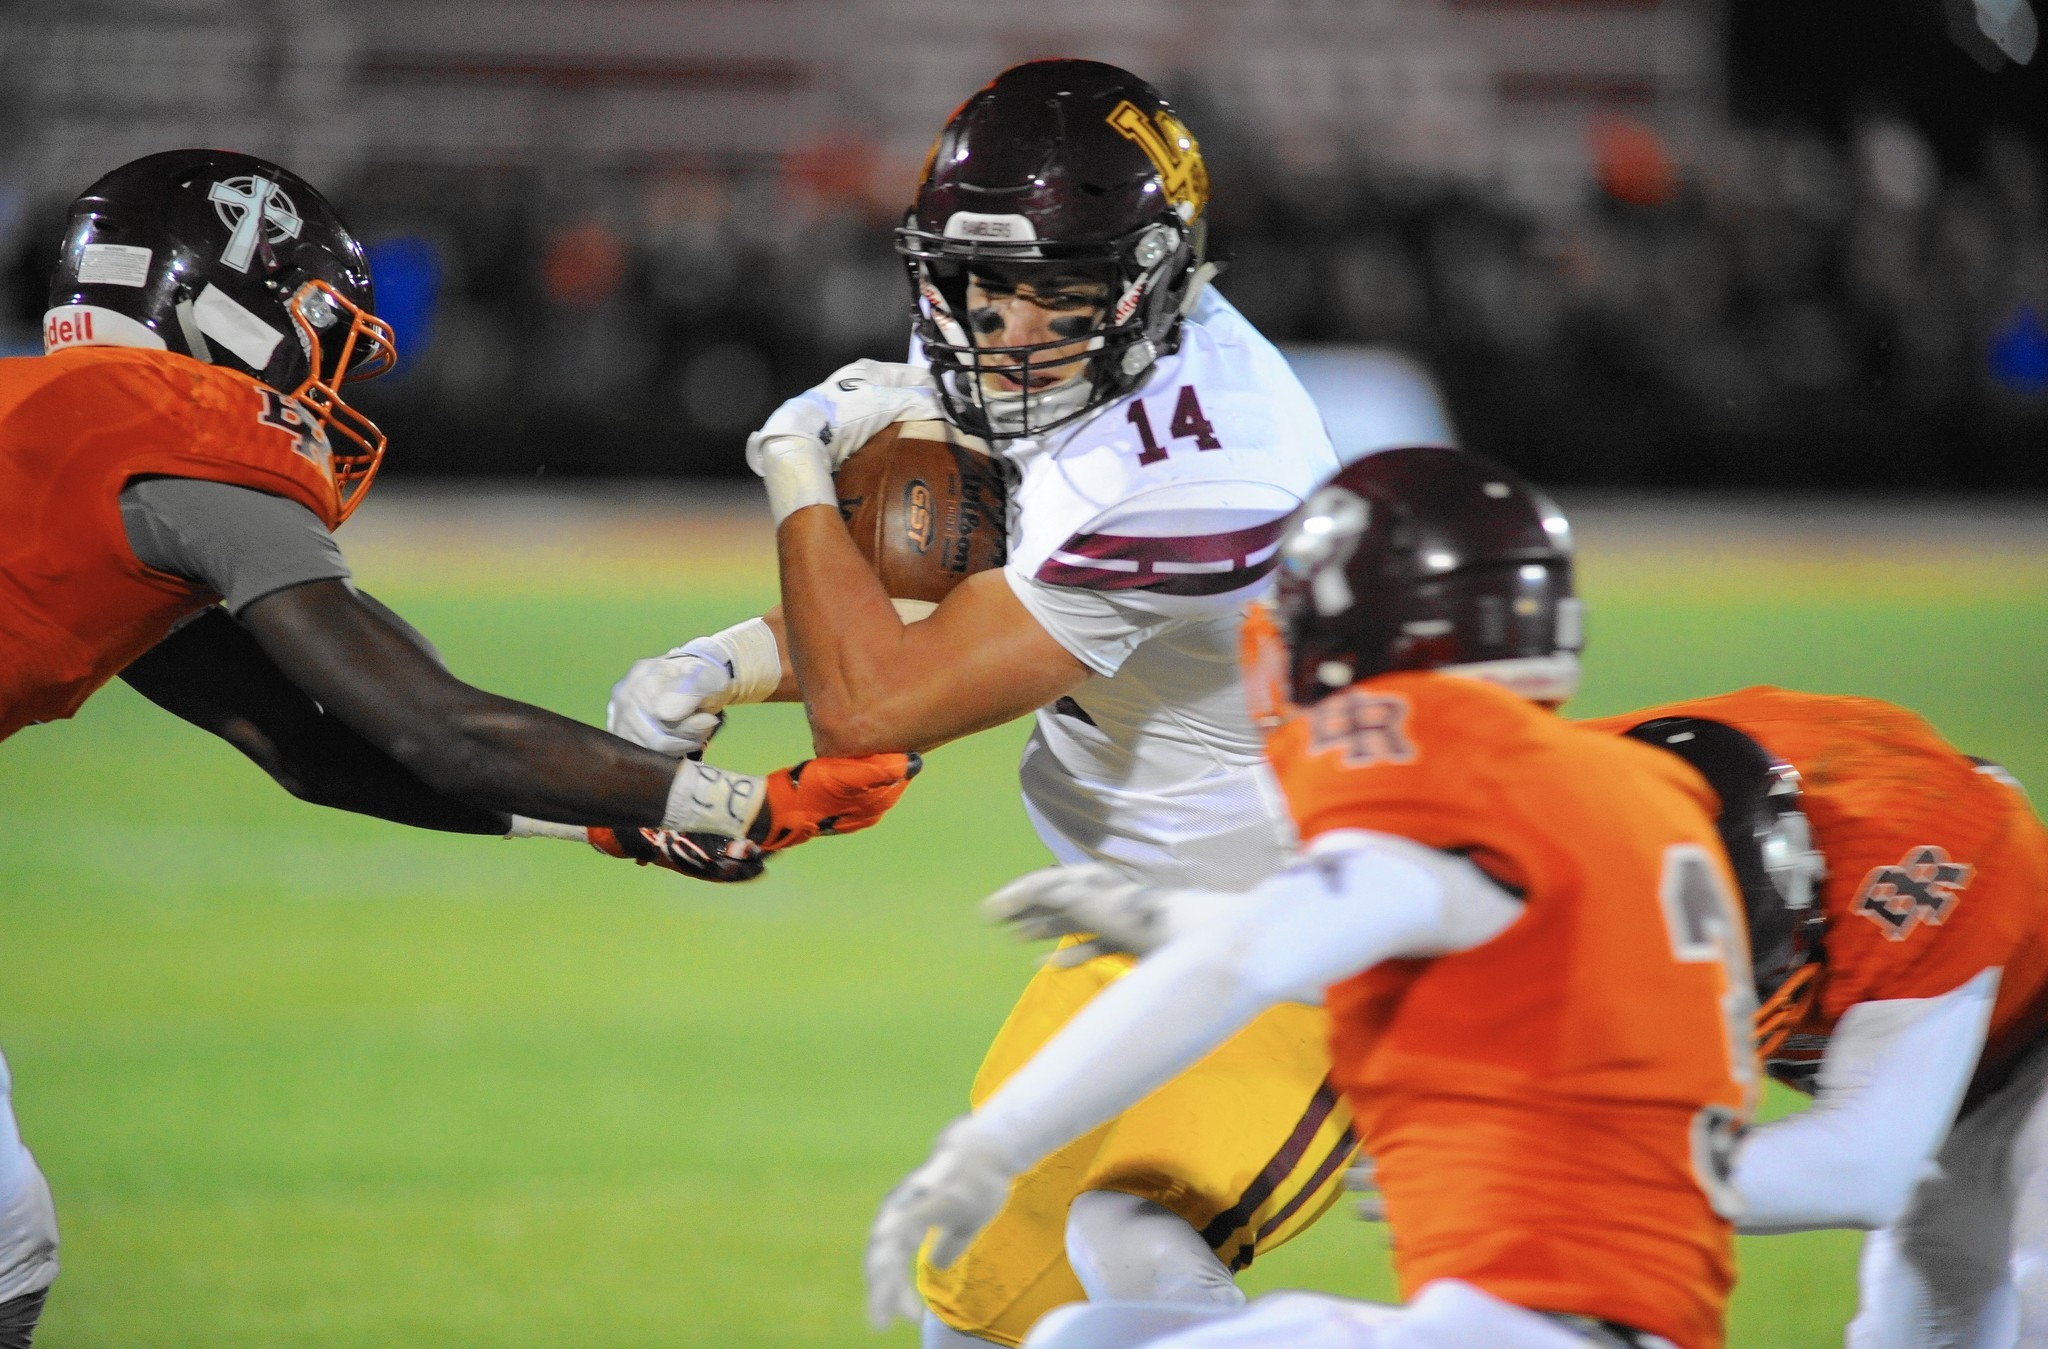 Loyola forces three critical turnovers in win over Brother Rice